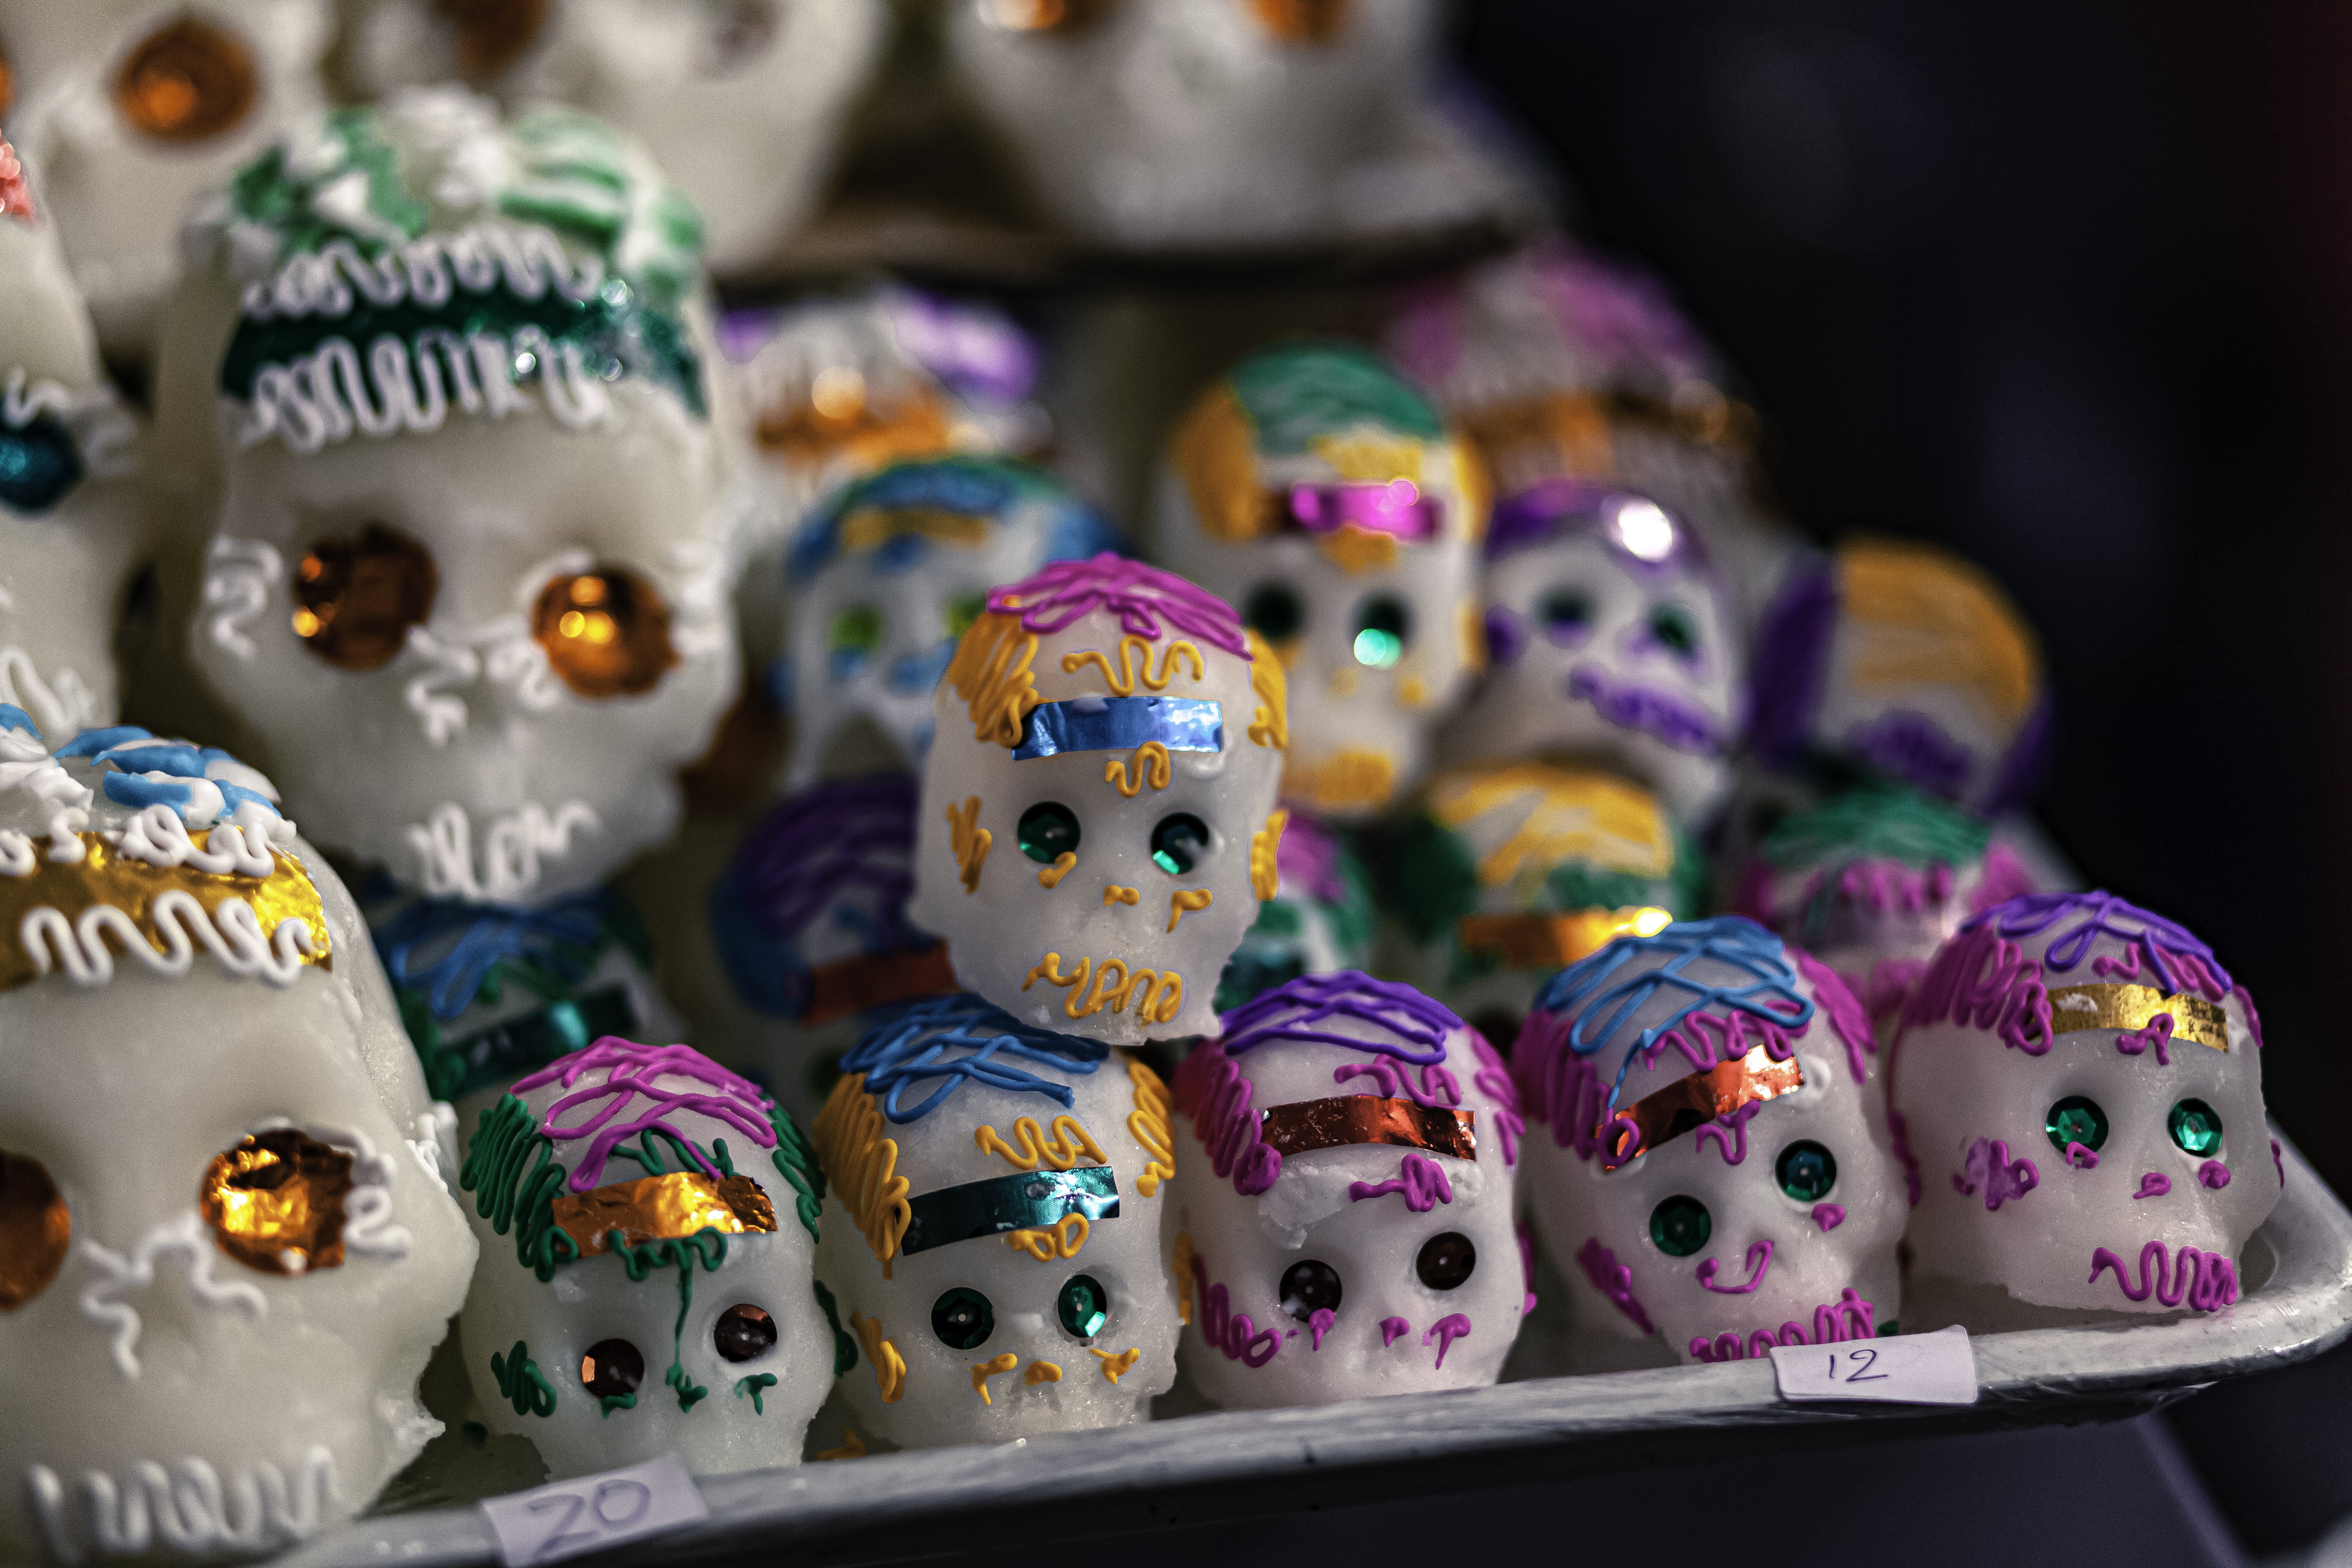 The meaning of Day of the Dead is changing